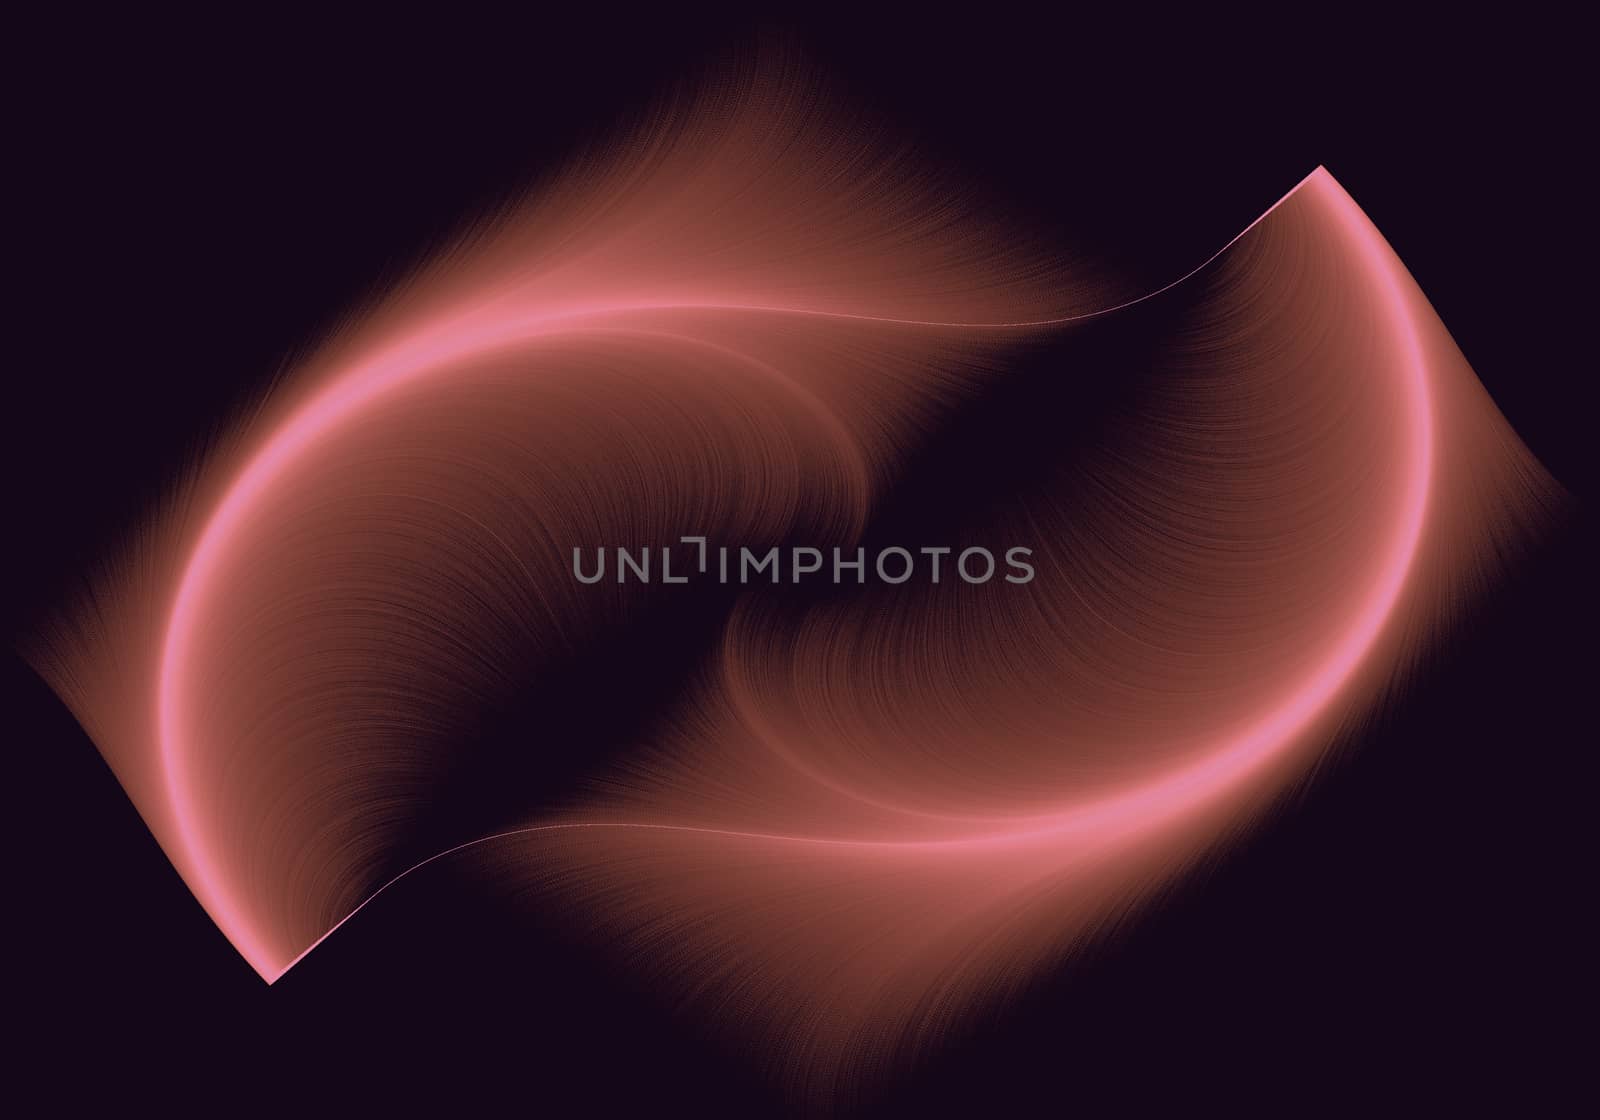 Fractal image on a black background depict colorful drawings in the form of beautiful feathers.